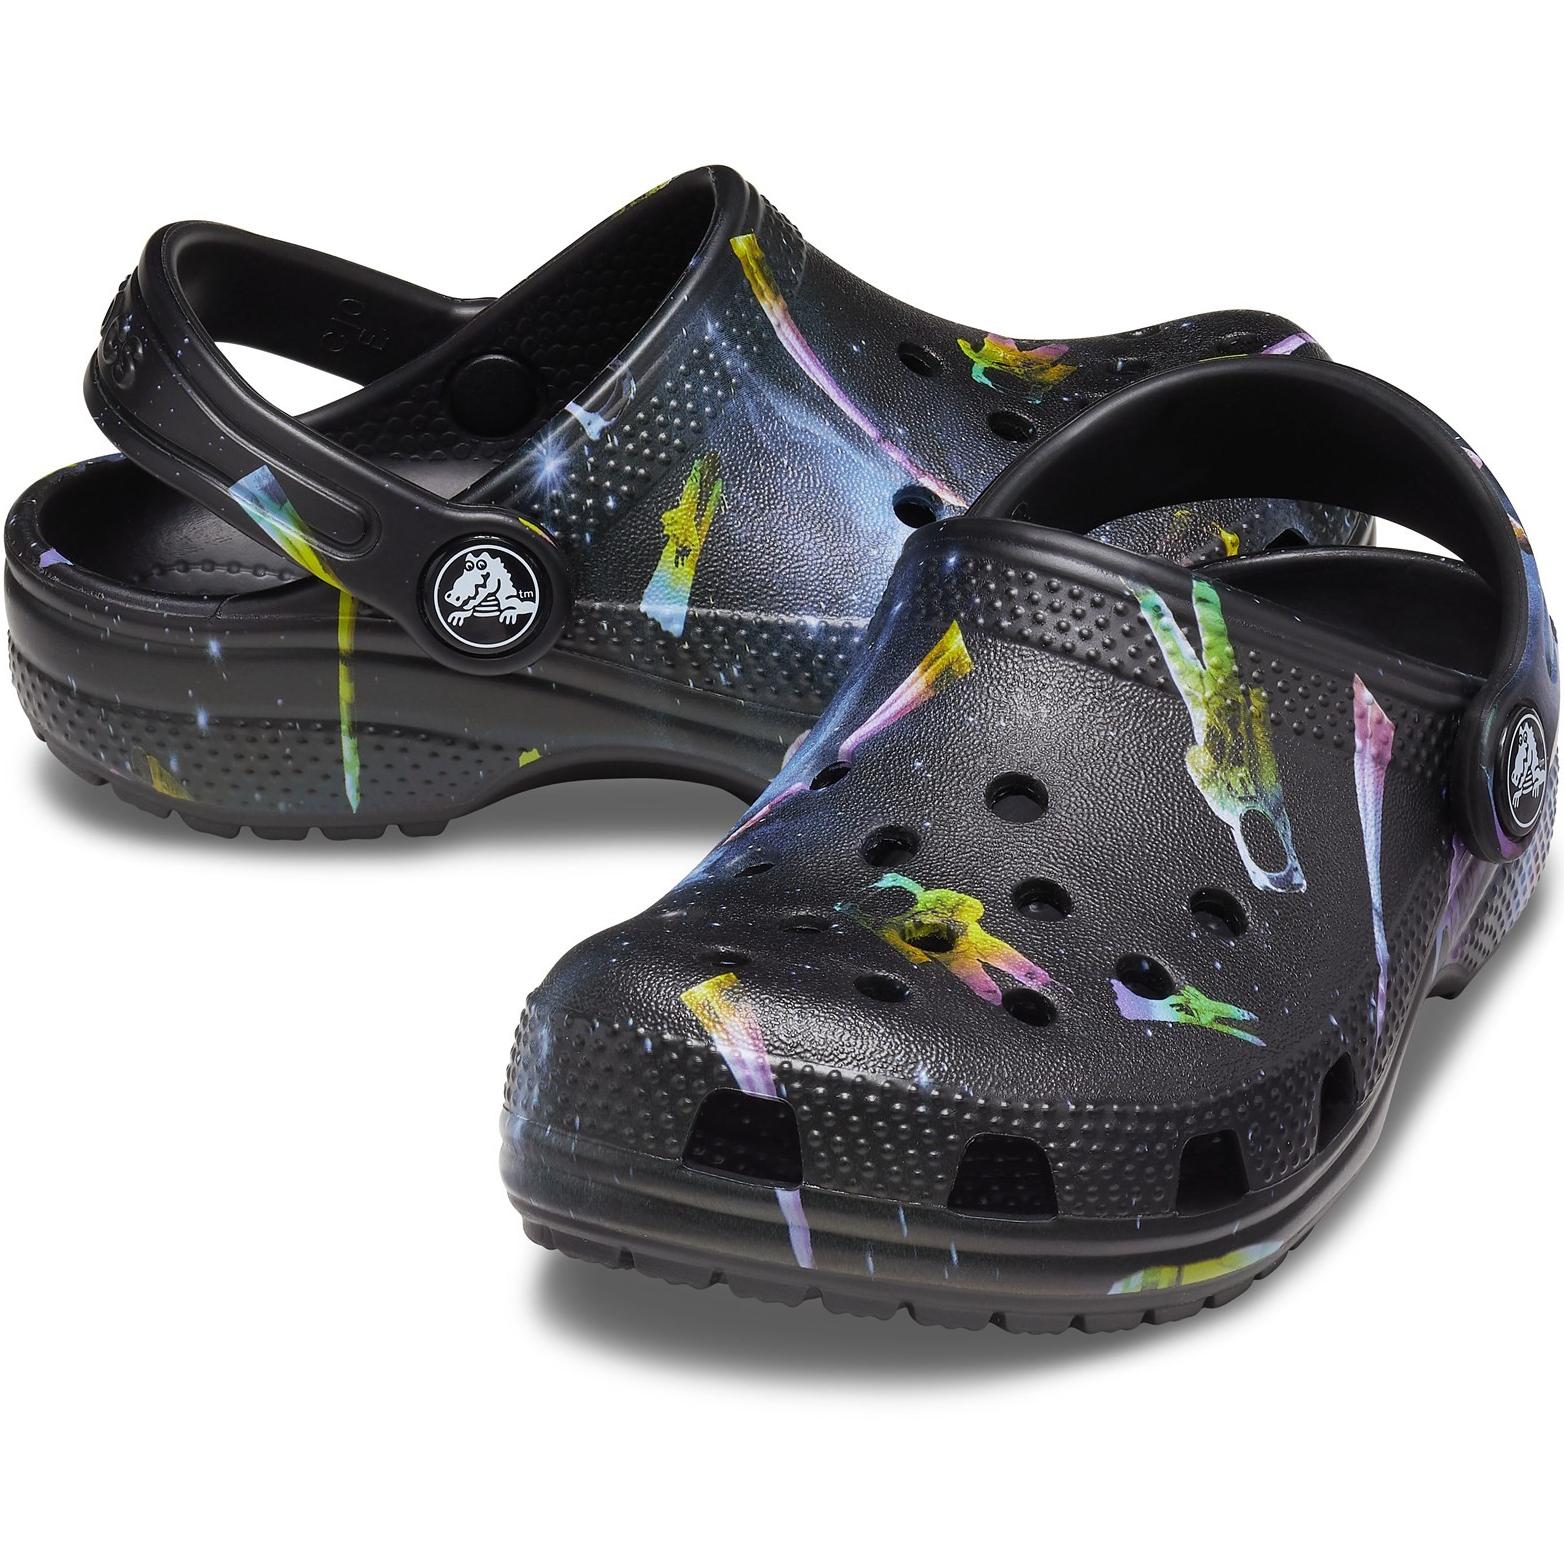 Crocs Classic Out of this World II Clog Shoes